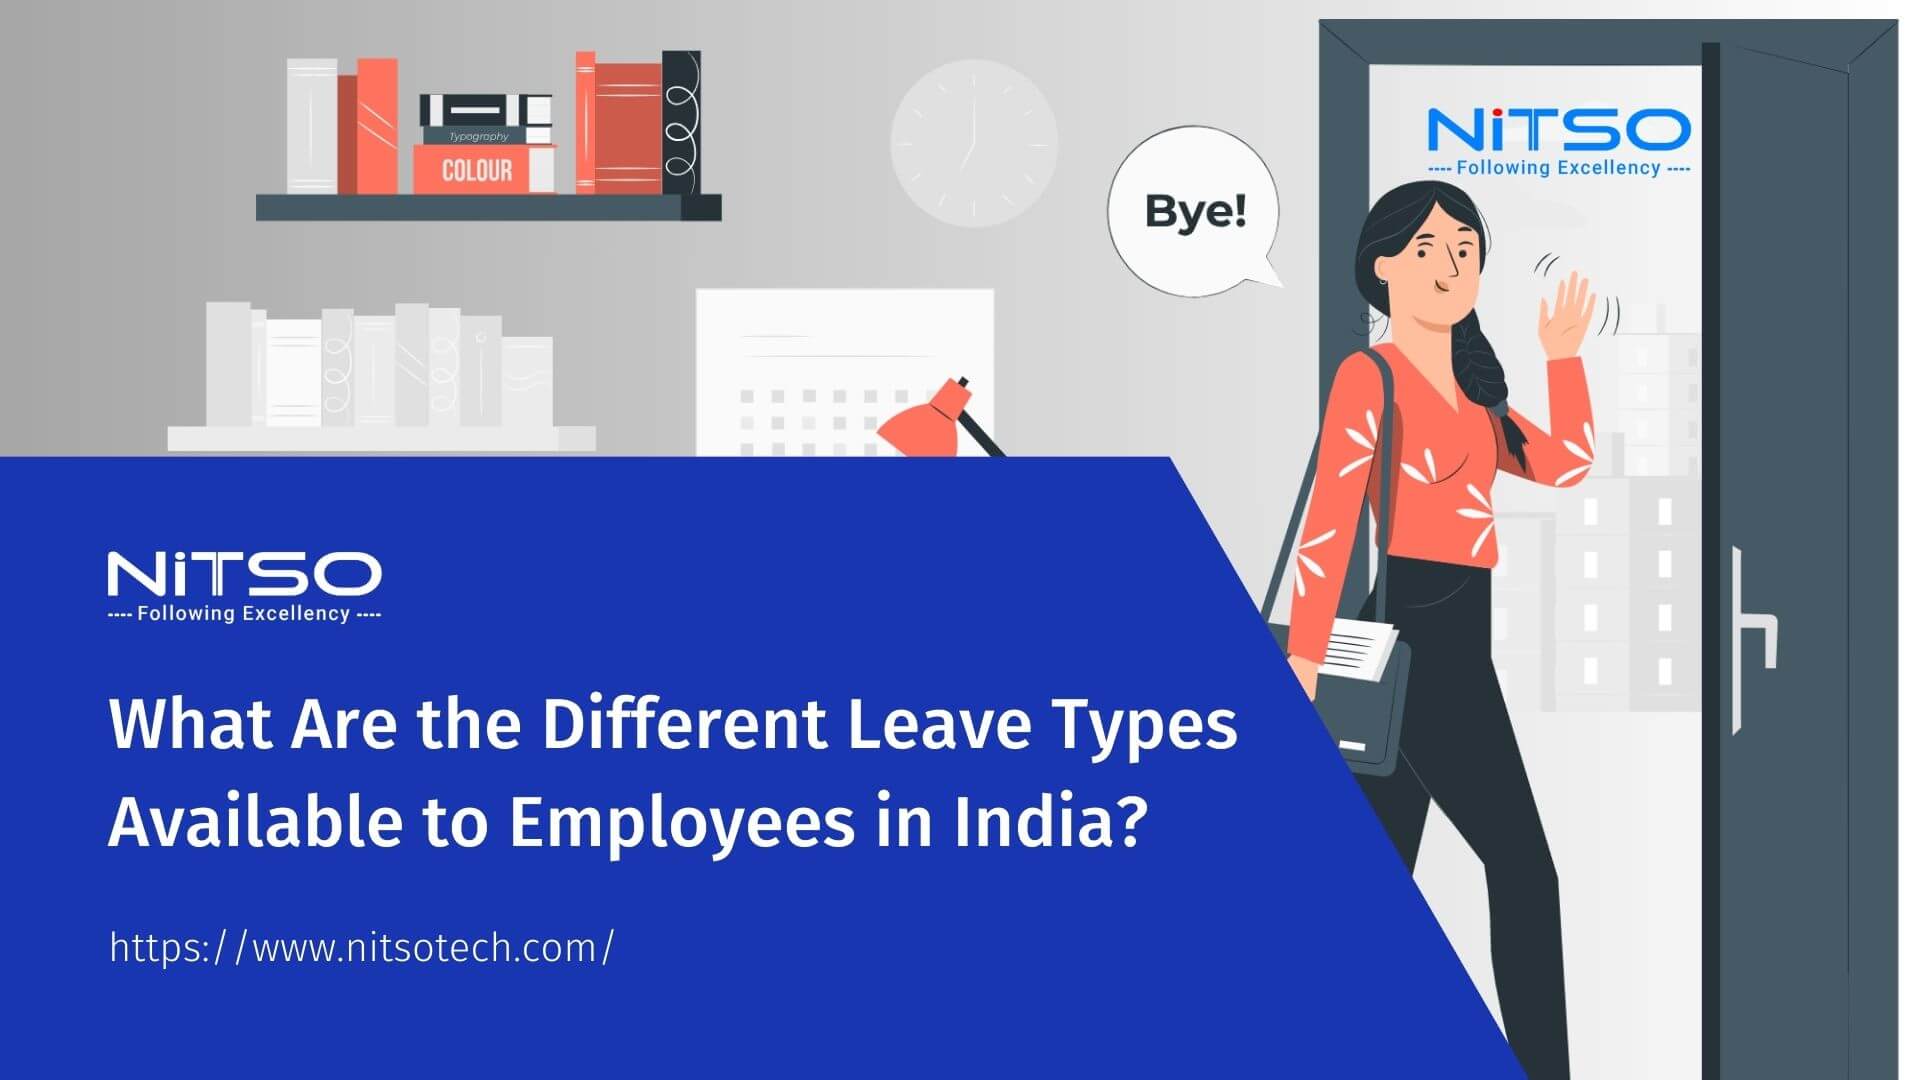 What Are the Different Leave Types in India For Employees?